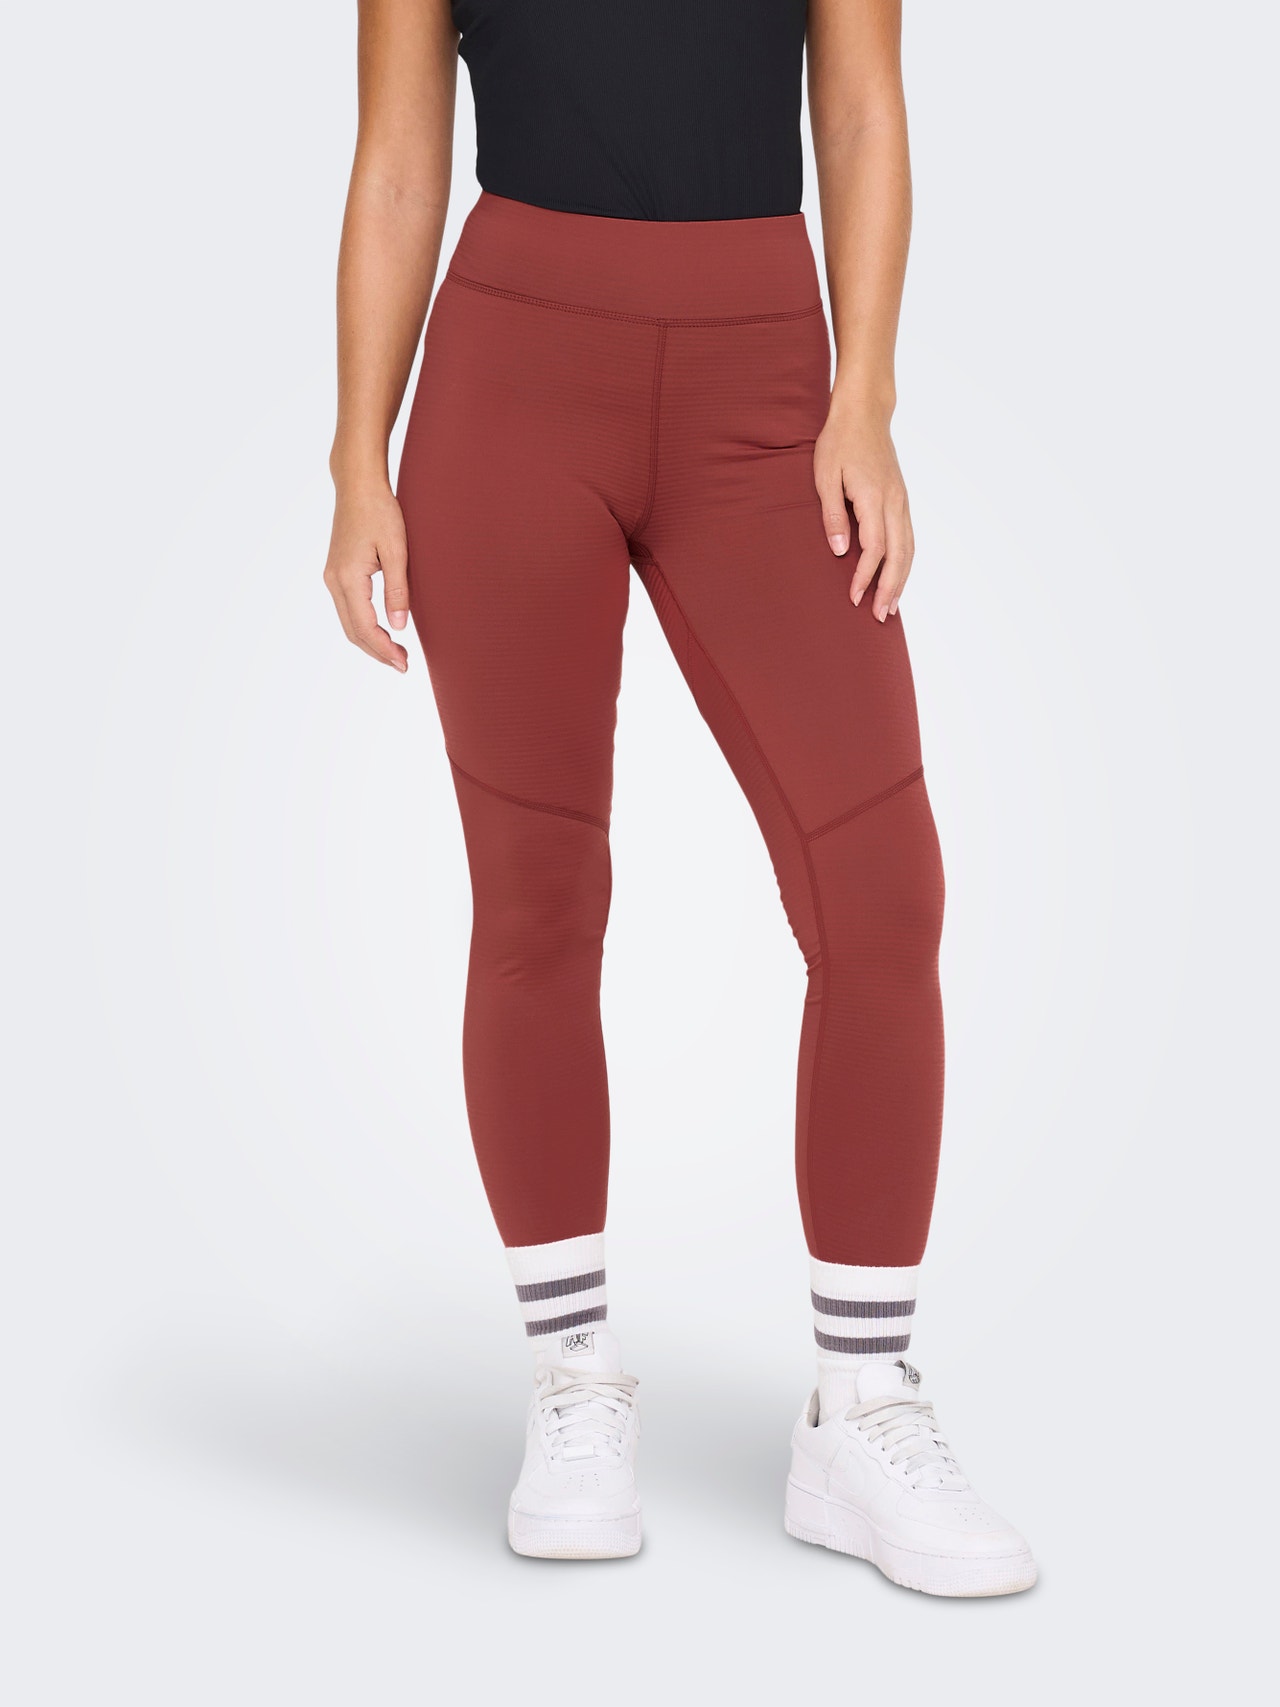 SOLD OUT bombshell sports wear leggings Thigh Highs Solid MAROON medium 